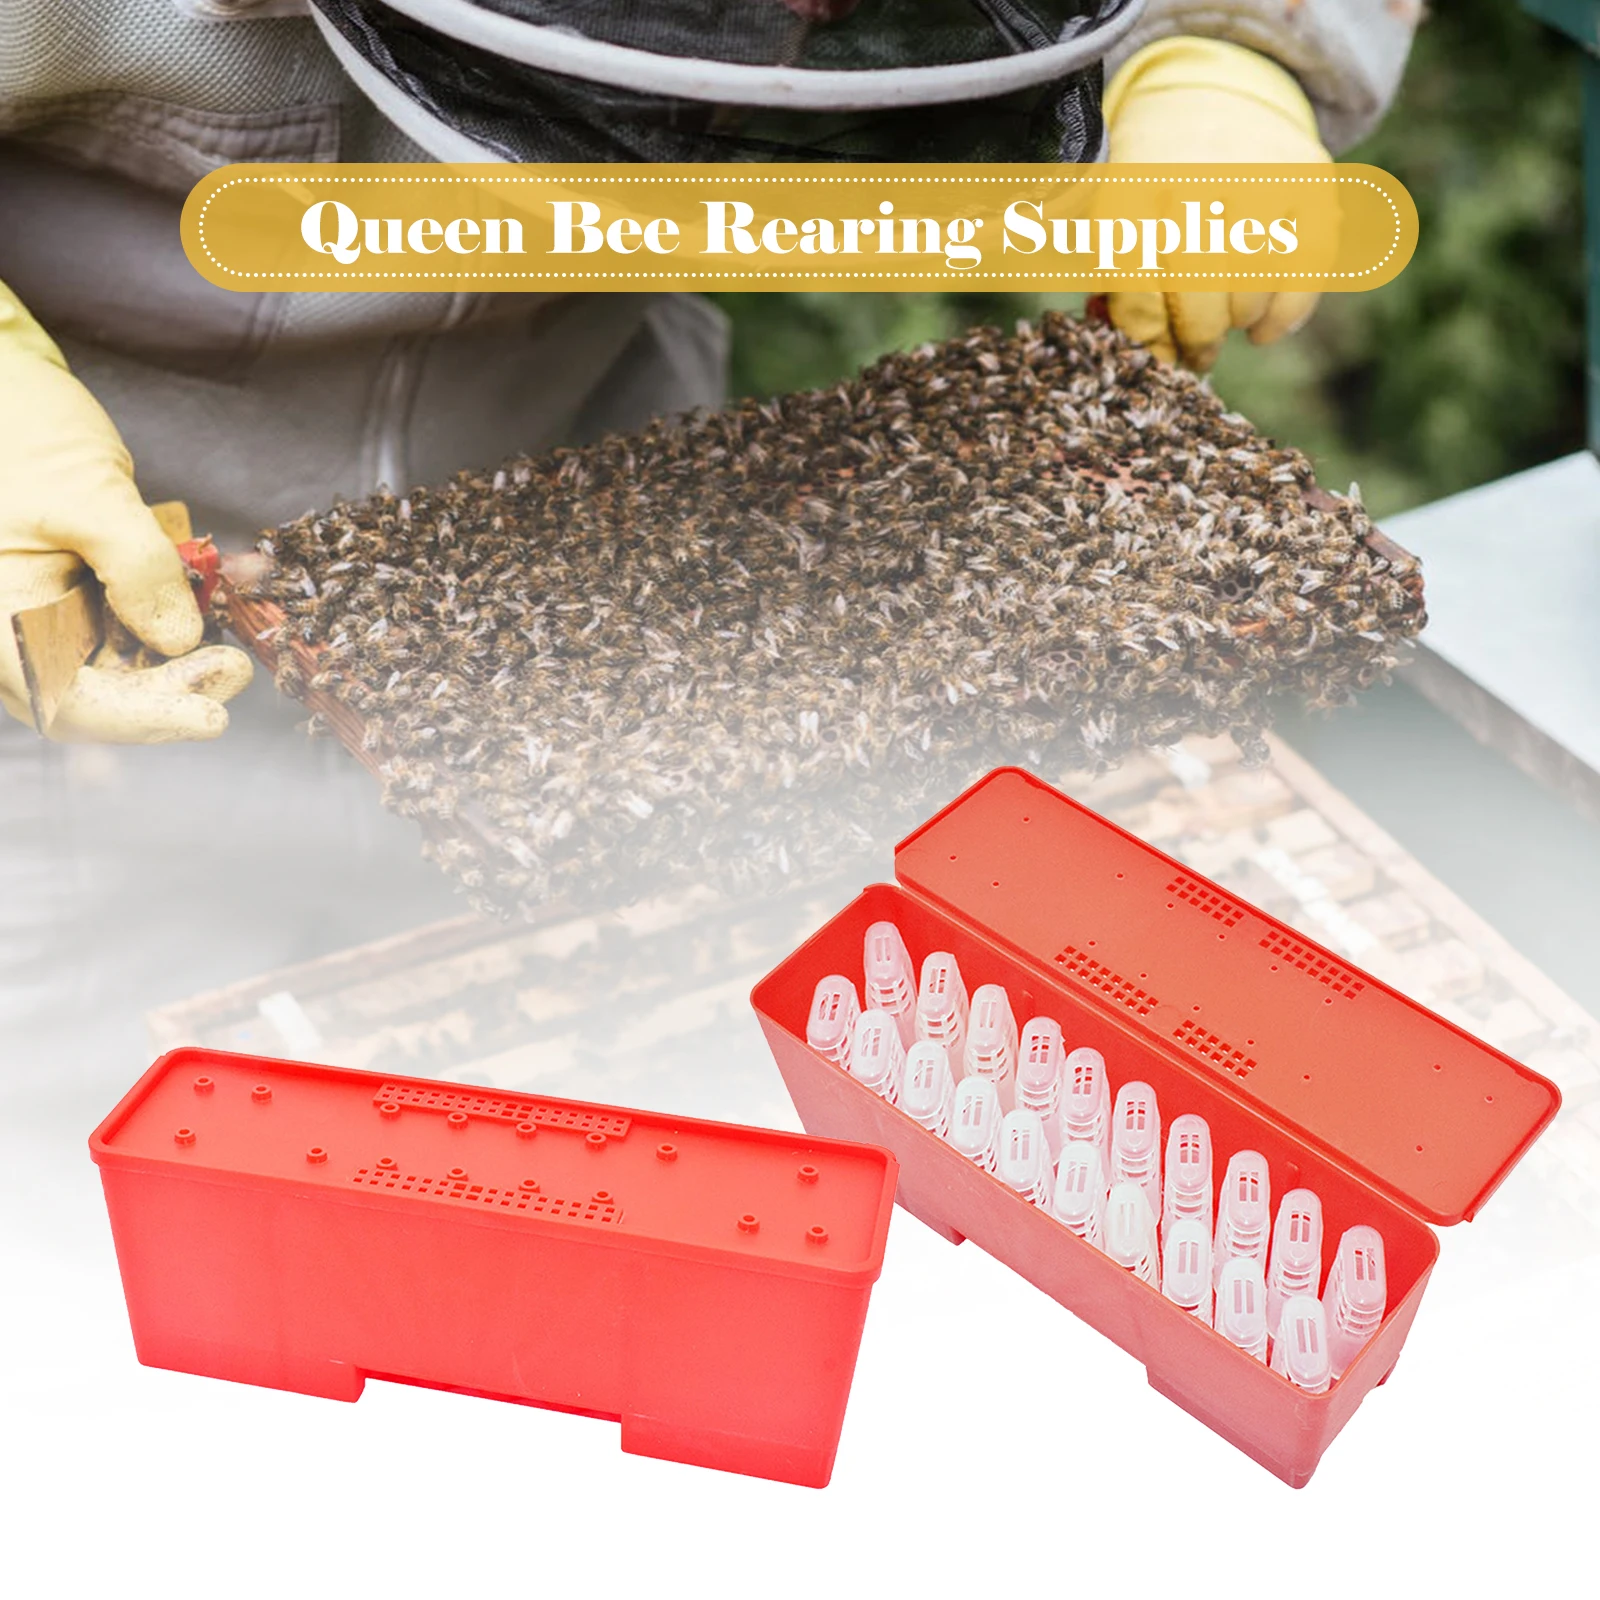 20PCS Bee Queen Cage with Transport Box Bee Queen Cage Holder Queen Bee Rearing System for Beekeeper Supplies Hive Tool Kits